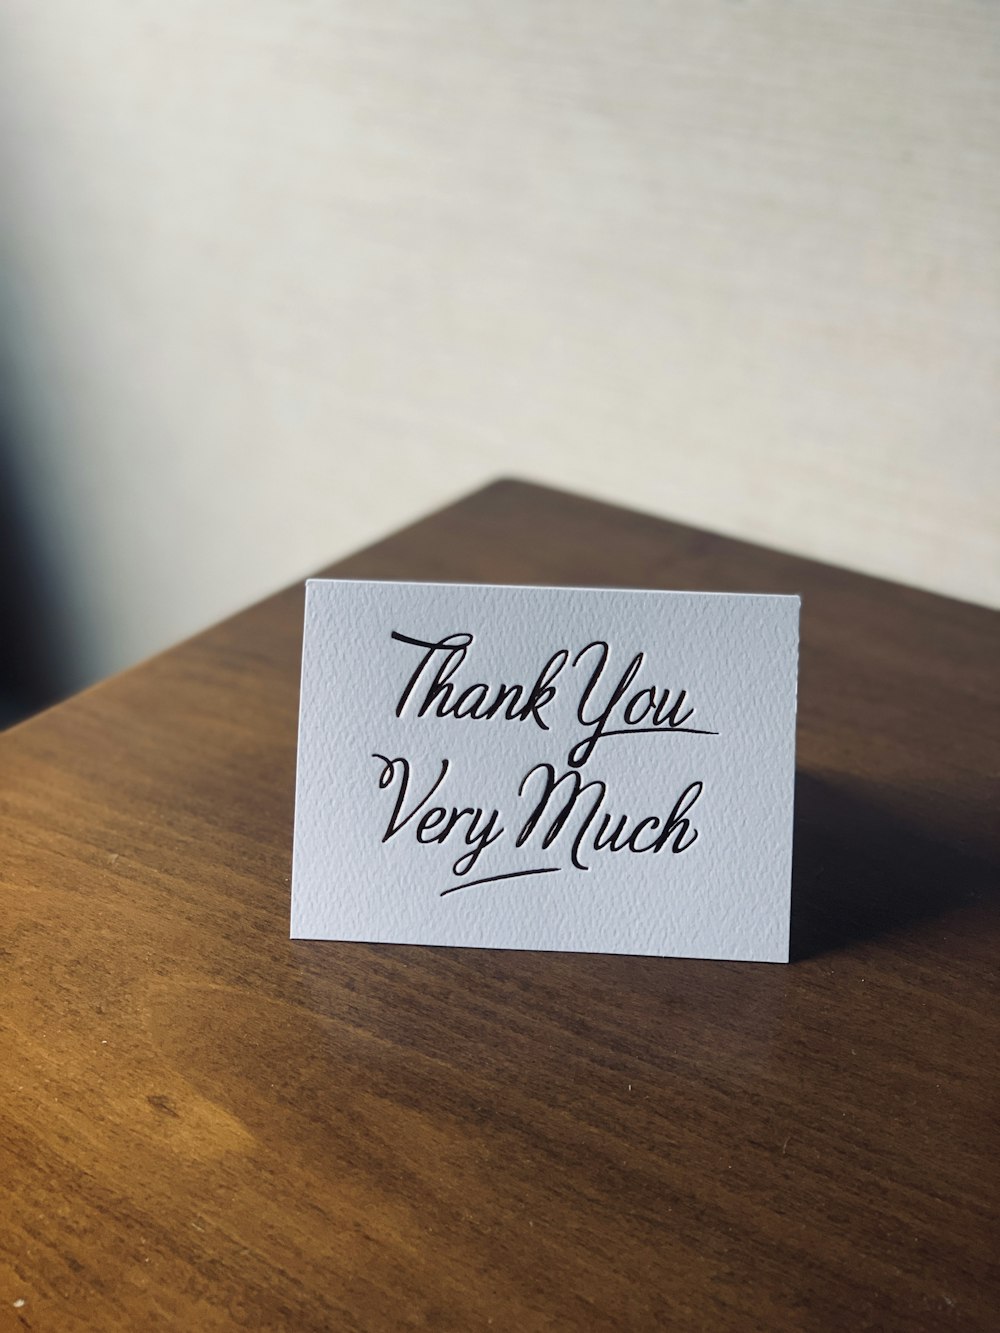 Thank You Card Pictures | Download Free Images on Unsplash